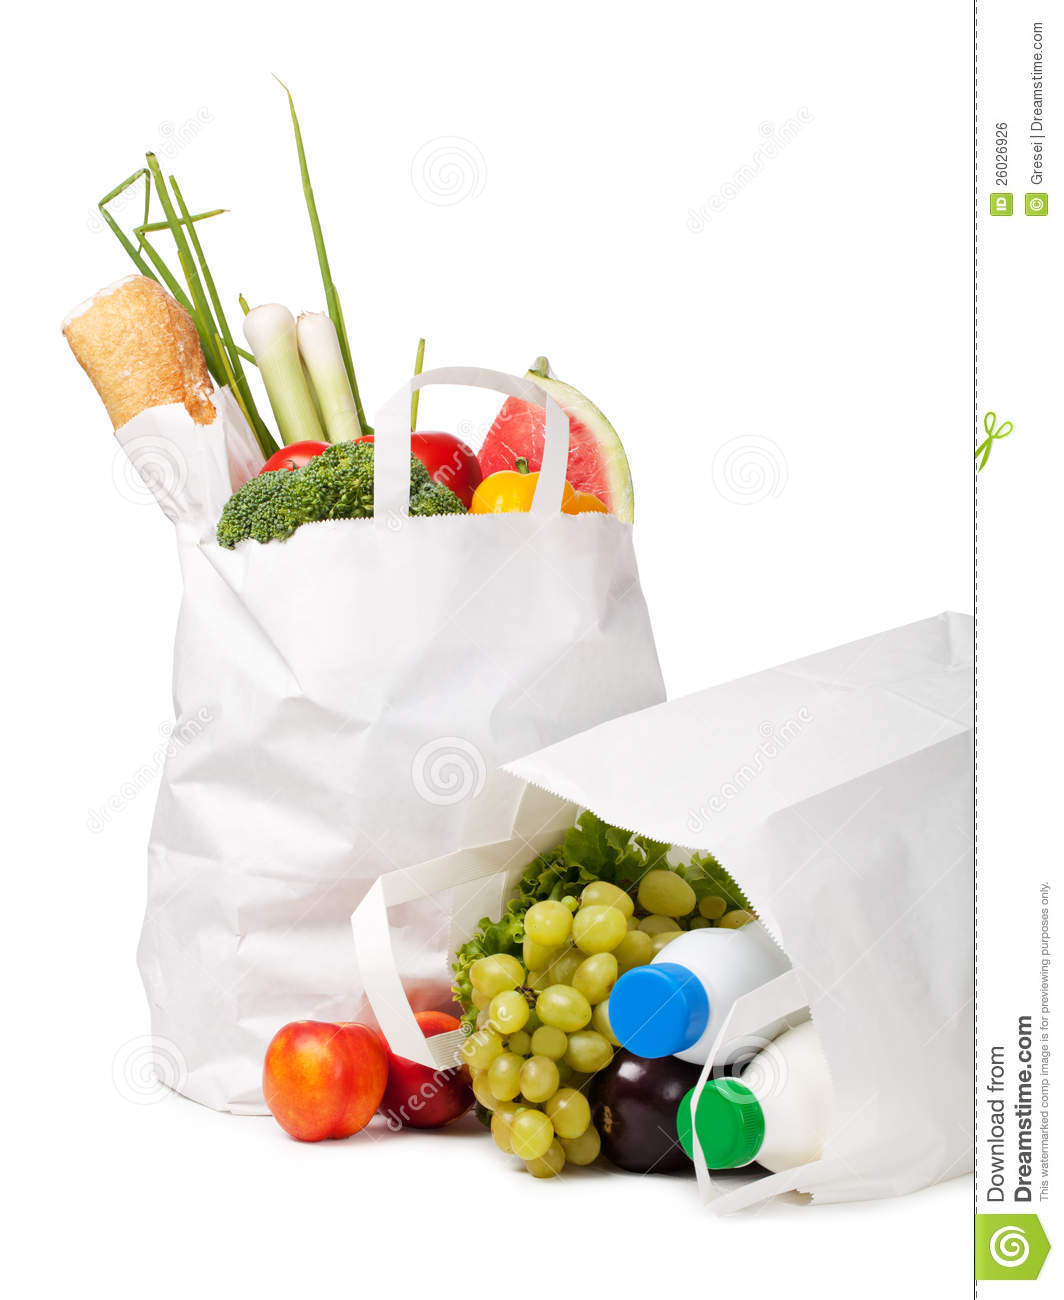 Paper Bag With Food On A White Background Mr No Pr No 2 343 2